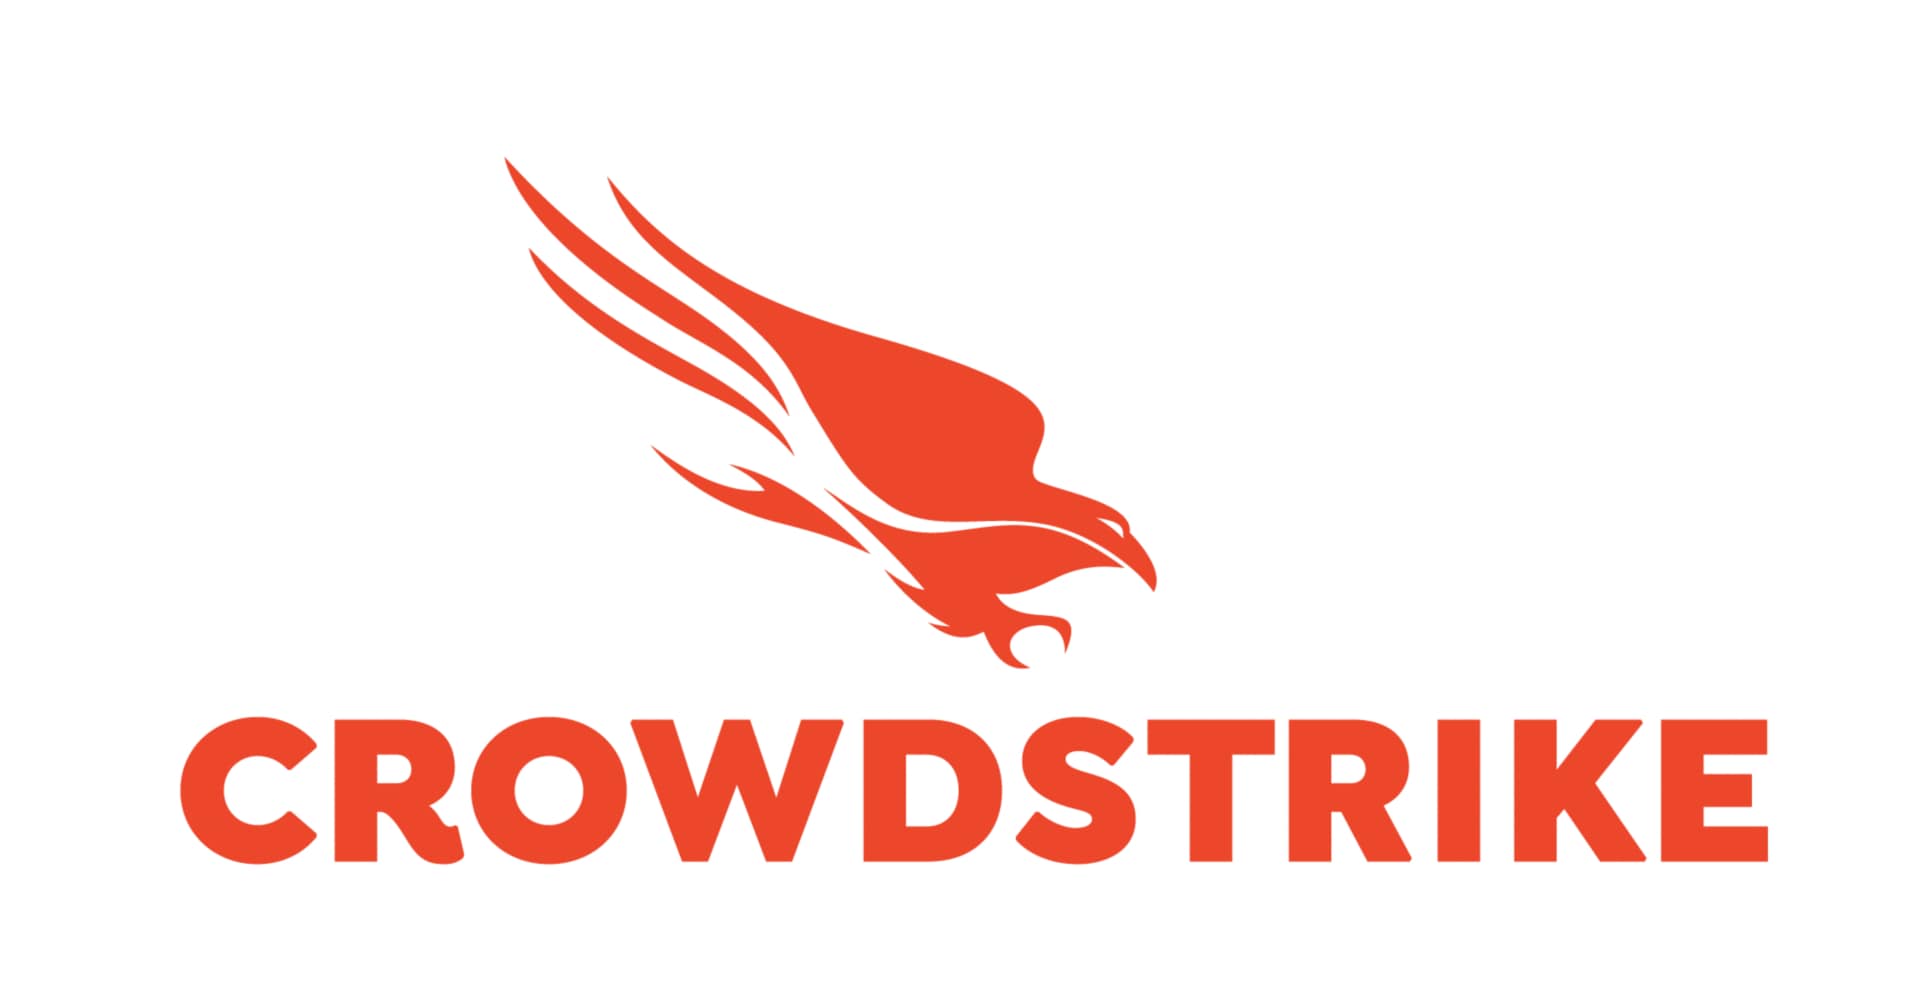 CrowdStrike 12-Month Falcon Control and Respond